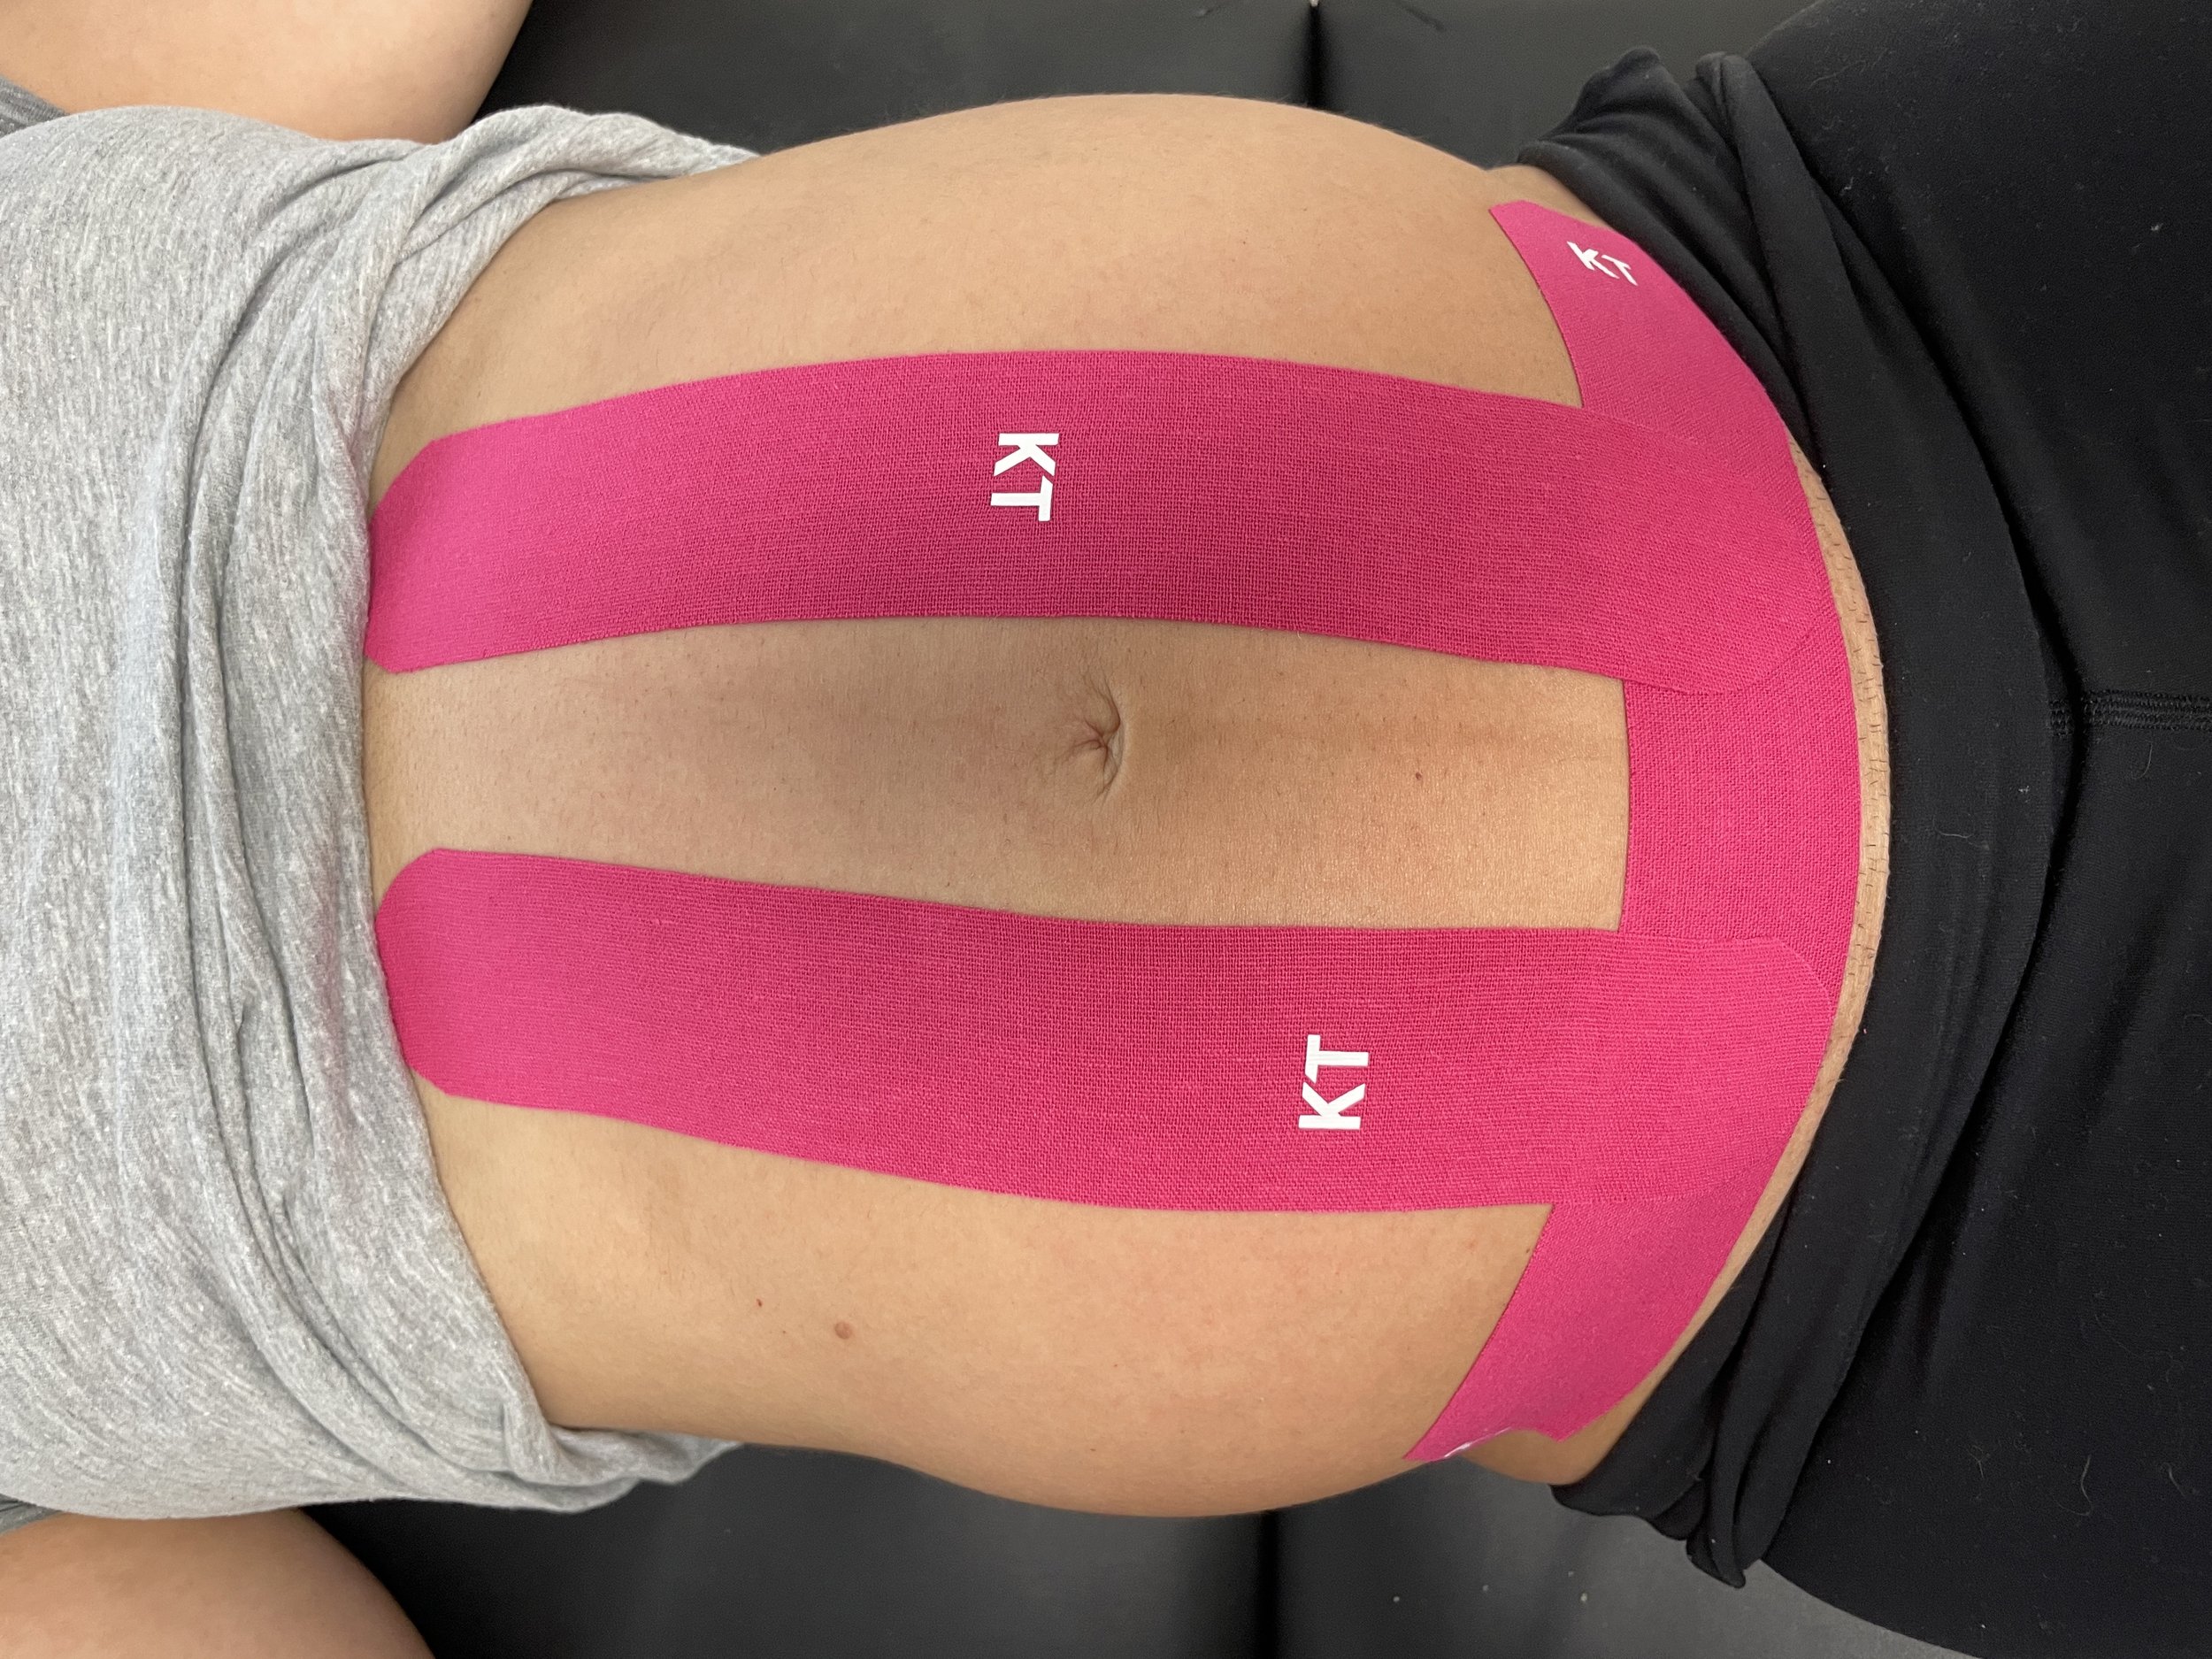 Kinesiology taping (KT) for pregnancy has many benefits. It's a